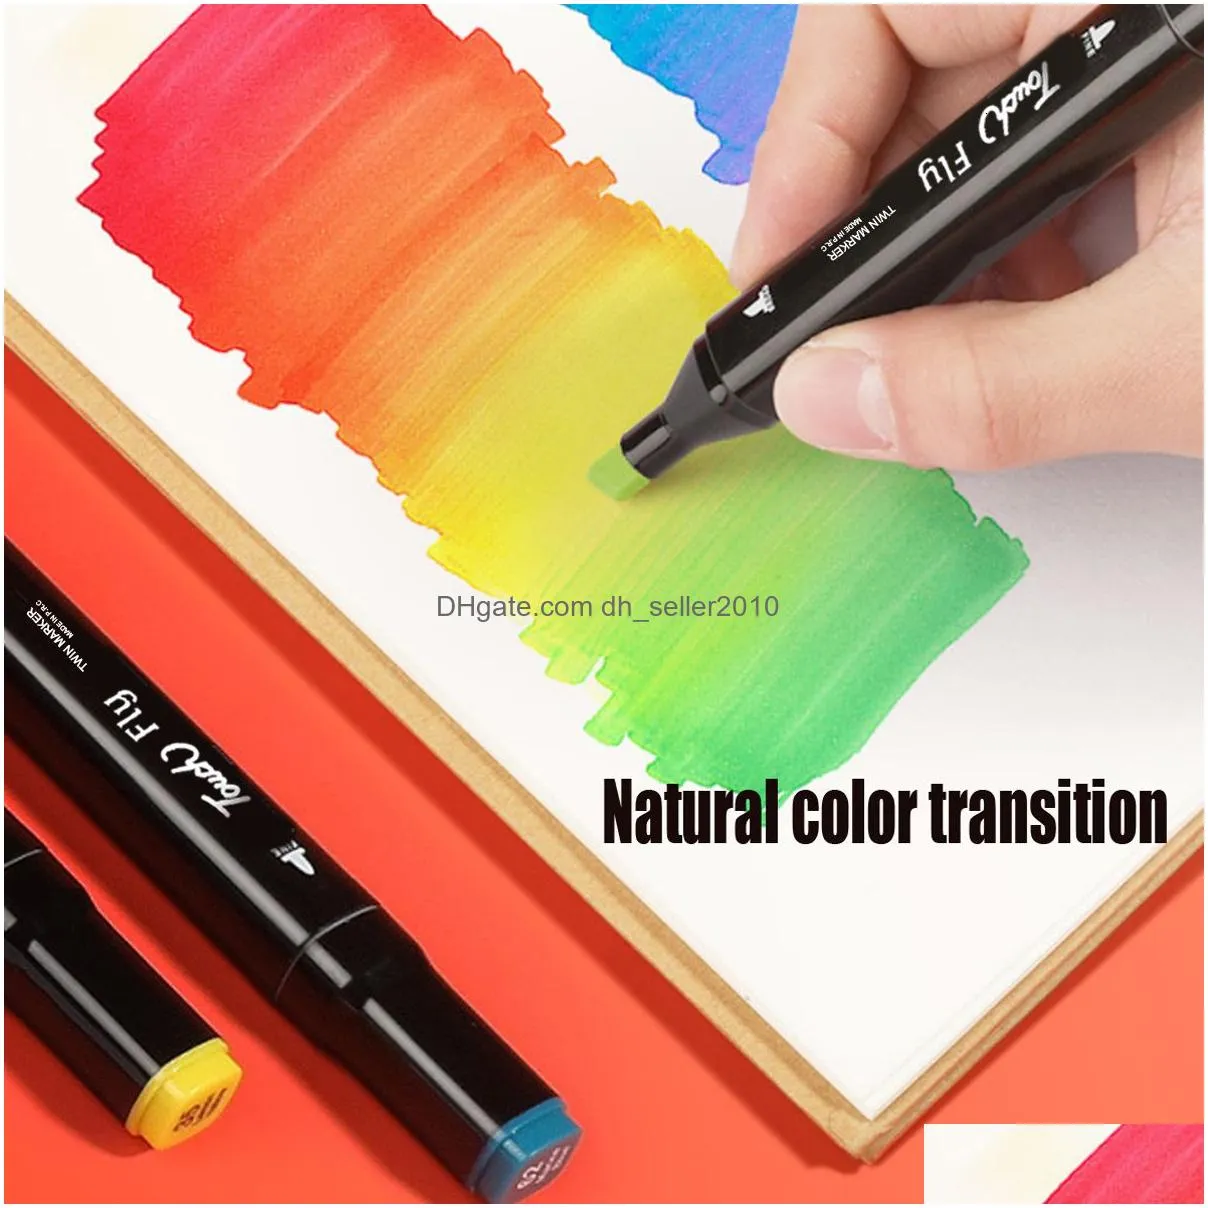 Markers Wholesale Markers 36486080100 Colors Dual Brush Painting Art Marker Set Pen Manga Sketching For Ding Student School Supplies O Dhskq